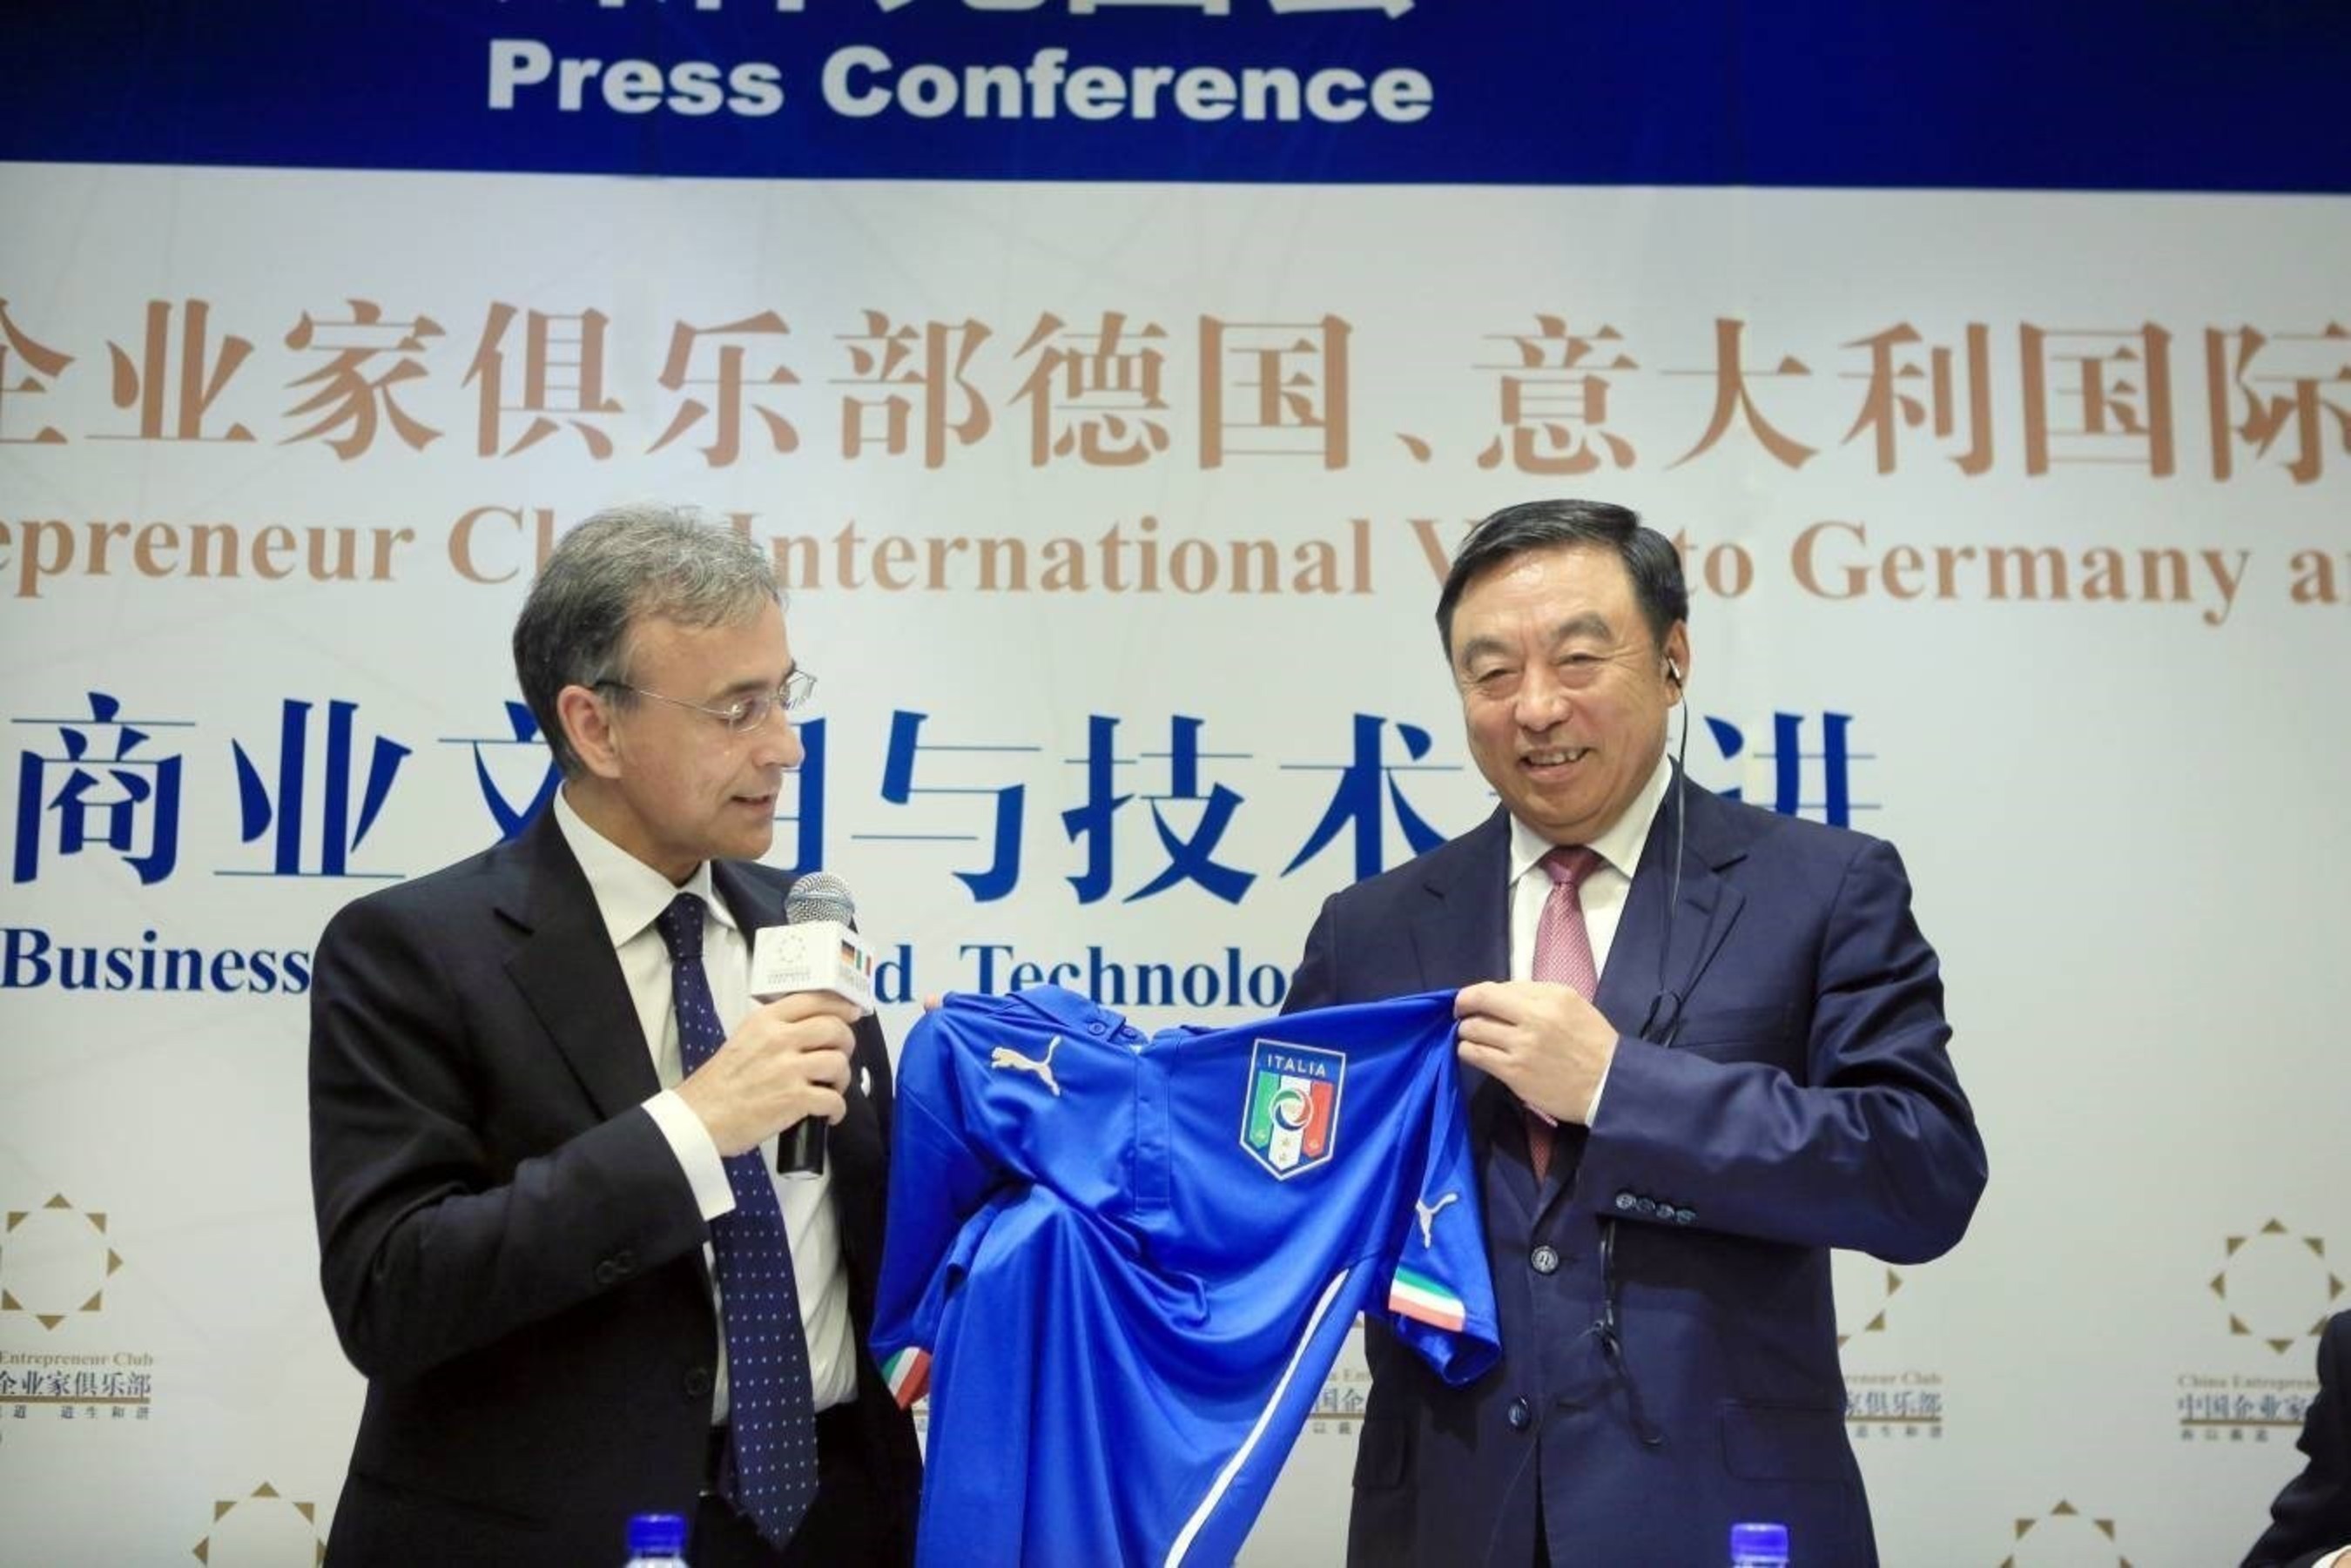 Mr. Ettore Francesco Sequi Gave a T-shirt of the Italian national football team to CEC as a gift